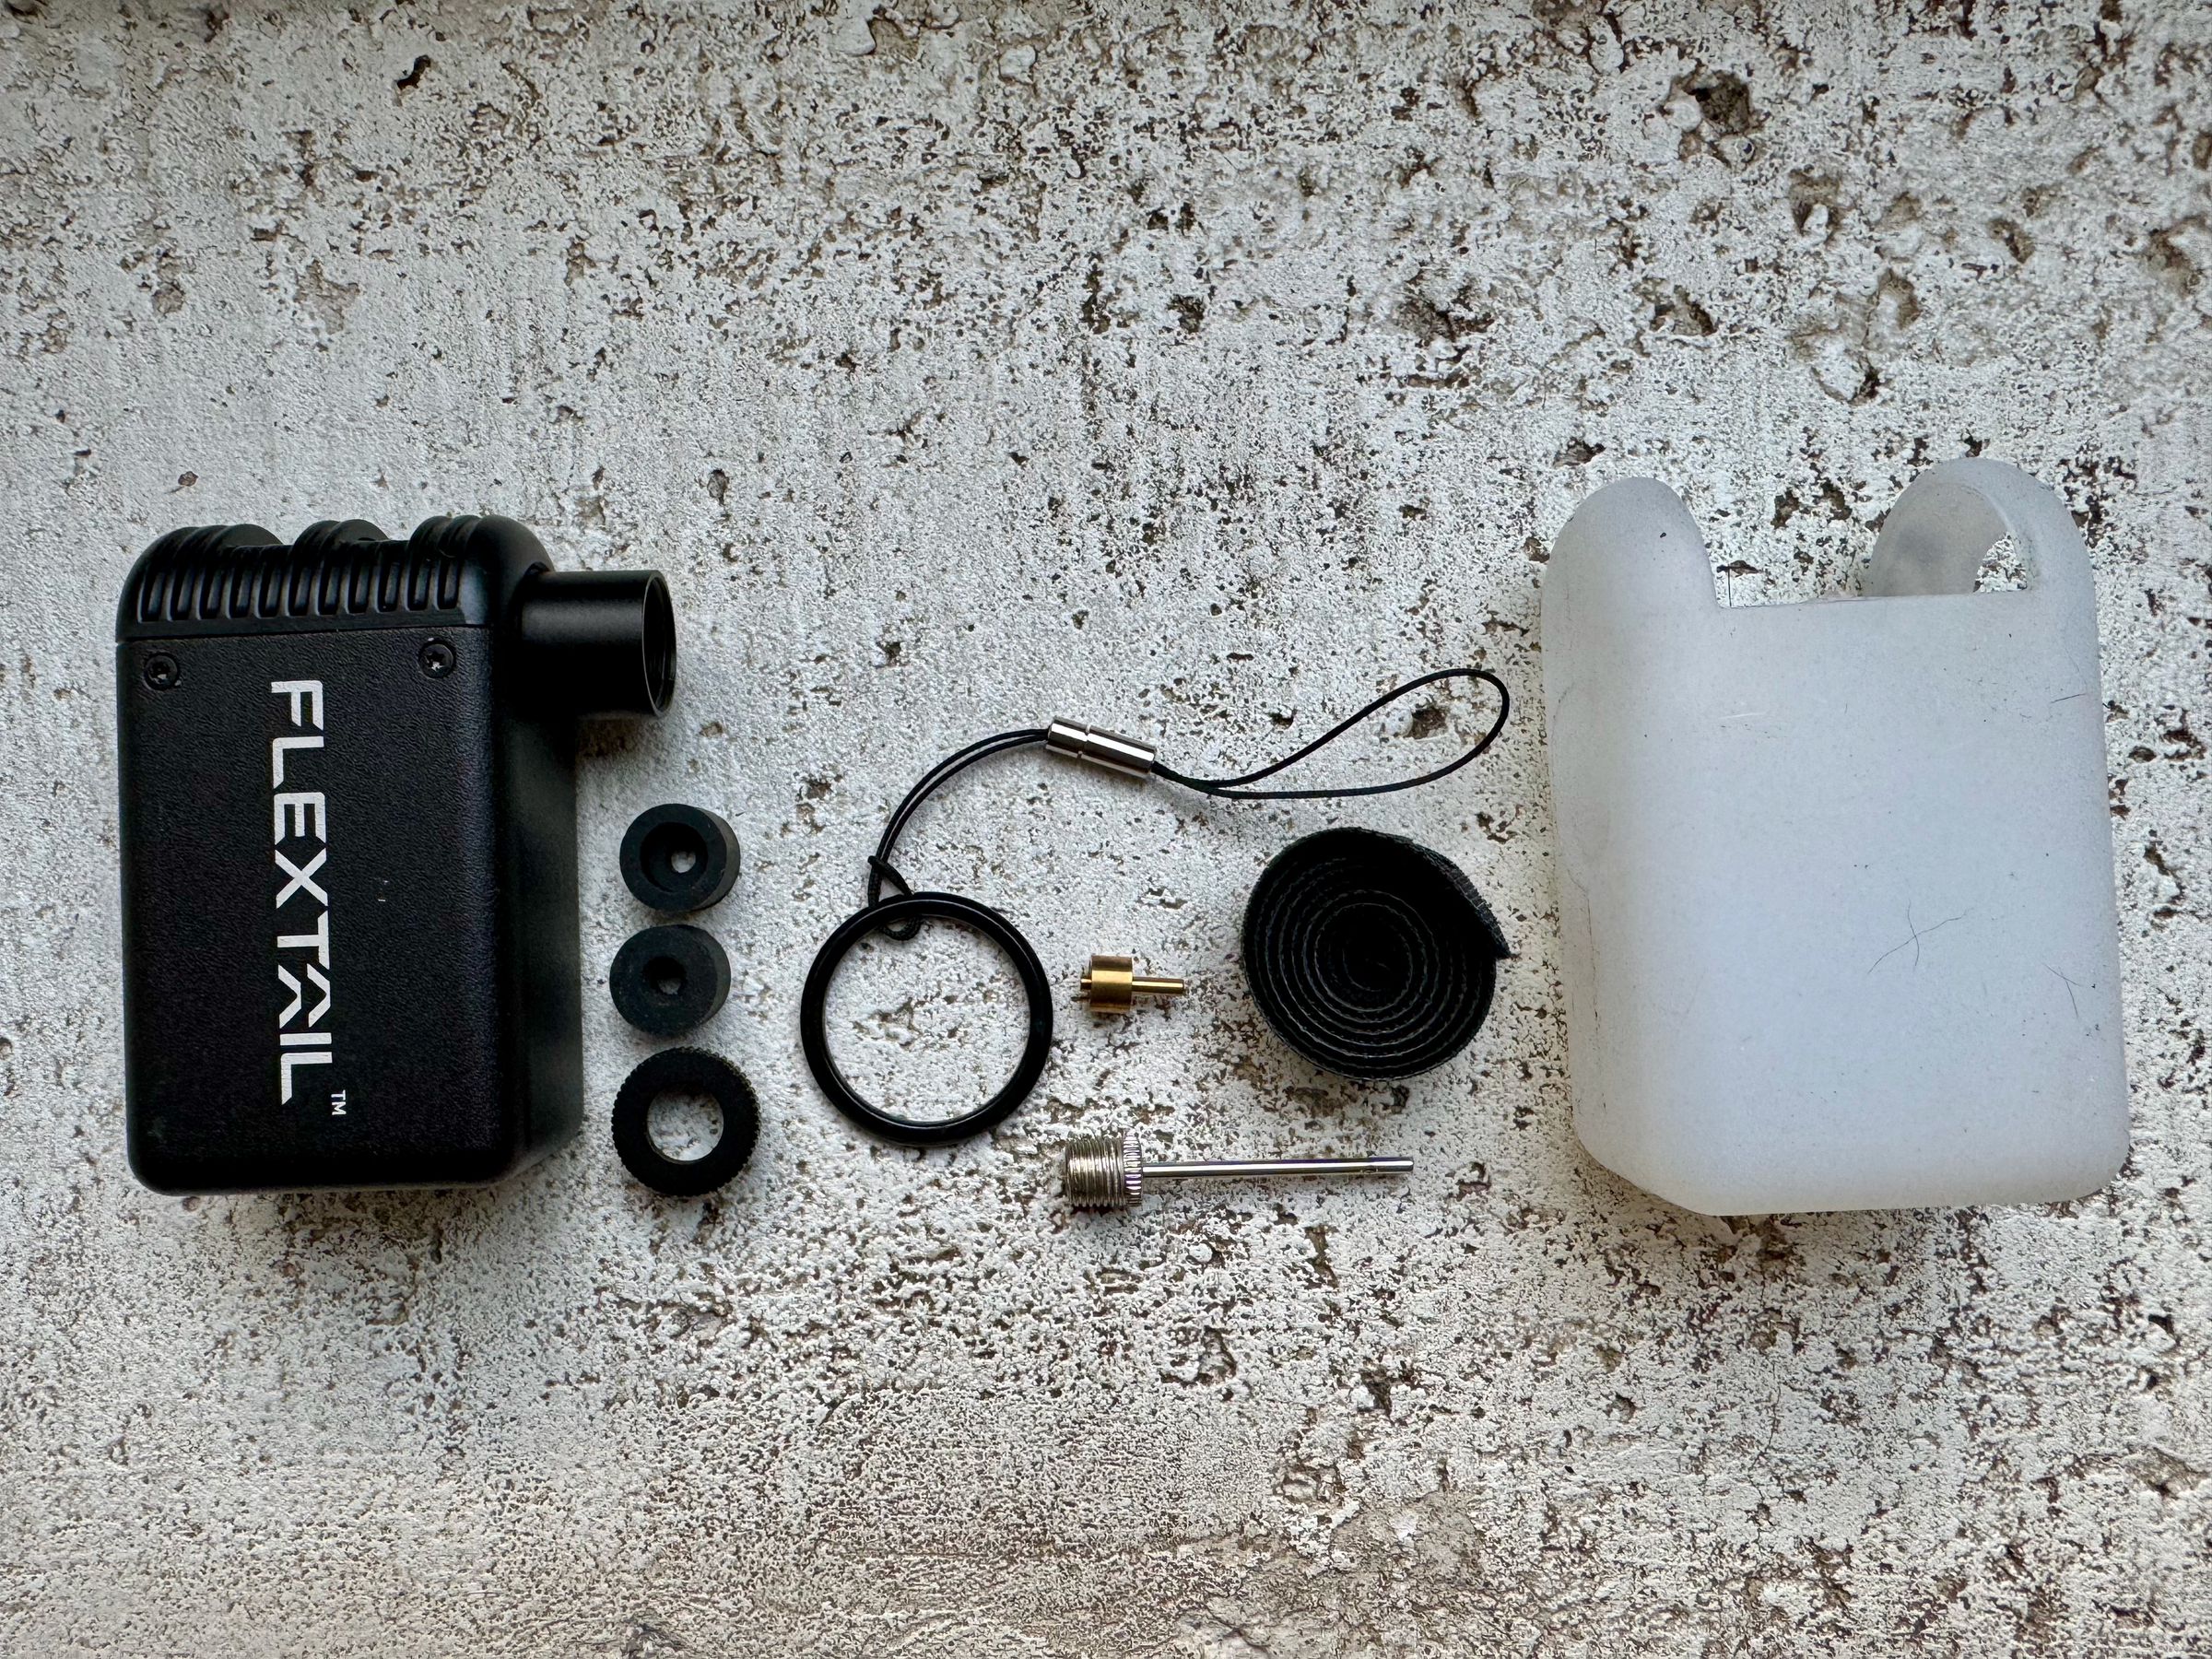 <em>From left to honest: the Small Bike Pump, two rubber adapter valves and the enclosure that screws the adapters onto the pump nozzle, a carrying ring with strap, pin for Schrader valve adapter, ball pump nozzle, bike strap, and silicon sleeve. Now not pictured is the USB-A to USB-C cable integrated in the sector.</em>